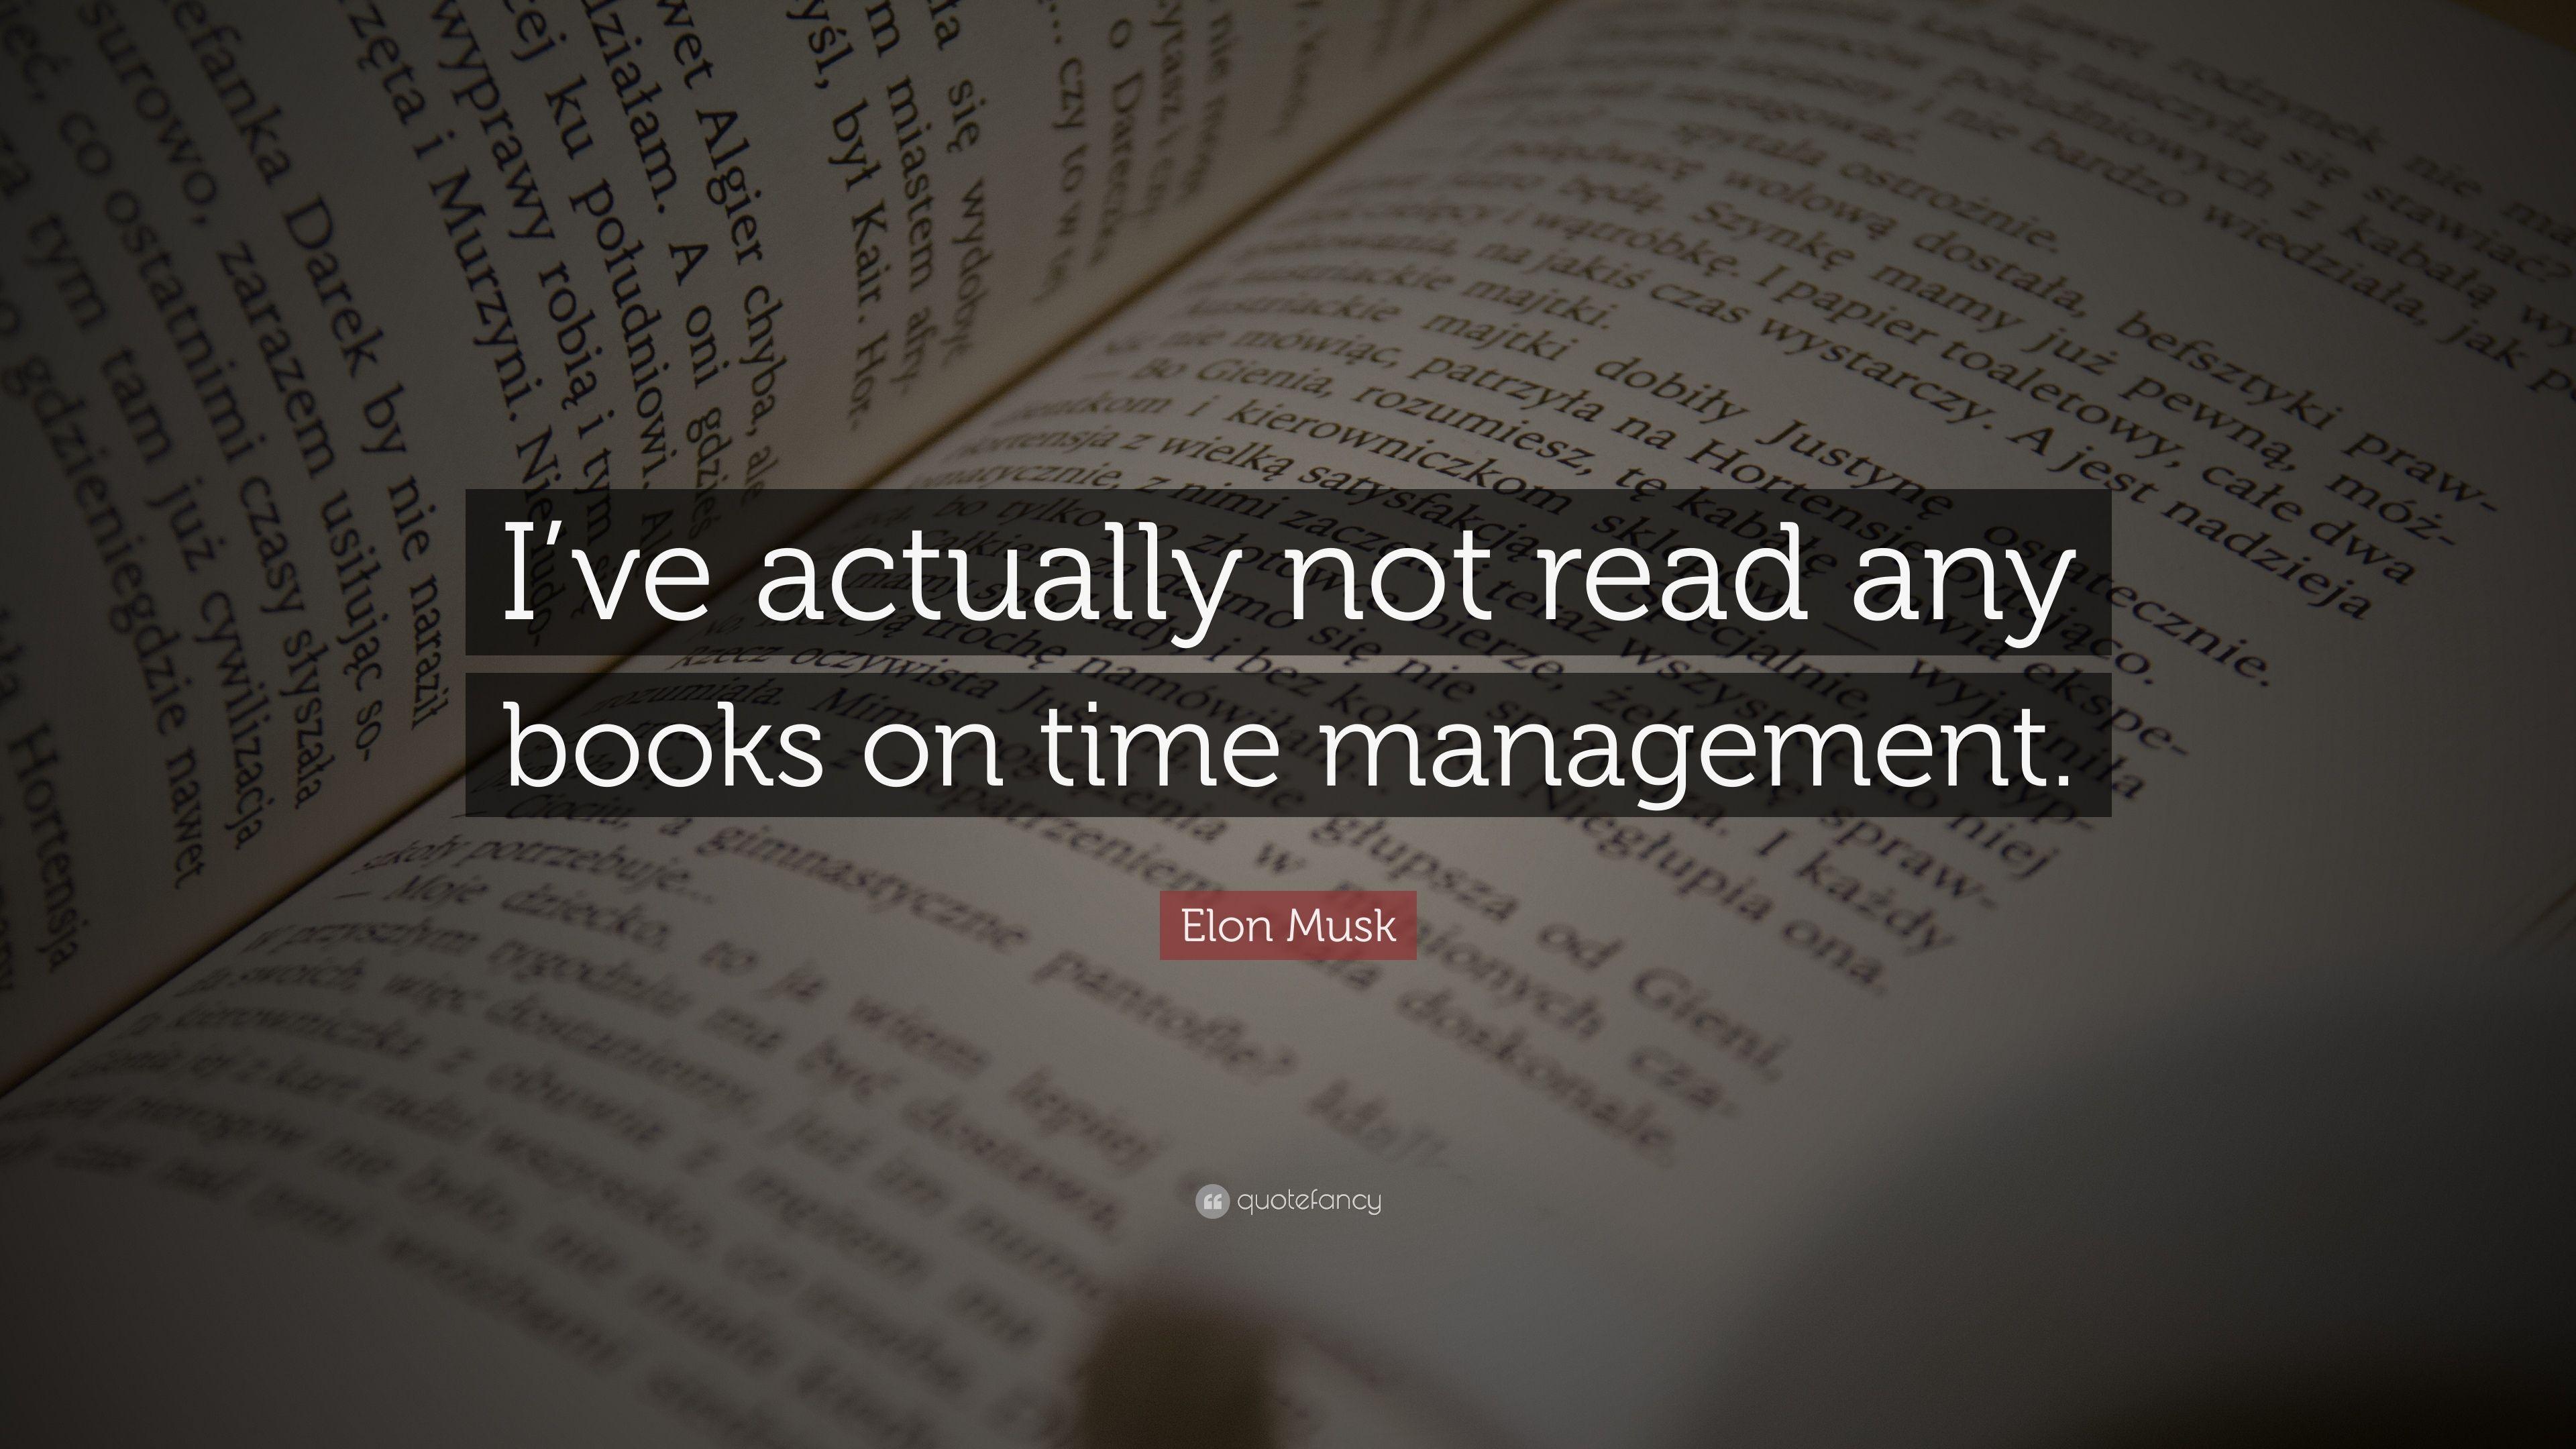 Elon Musk Quote: “I've actually not read any books on time